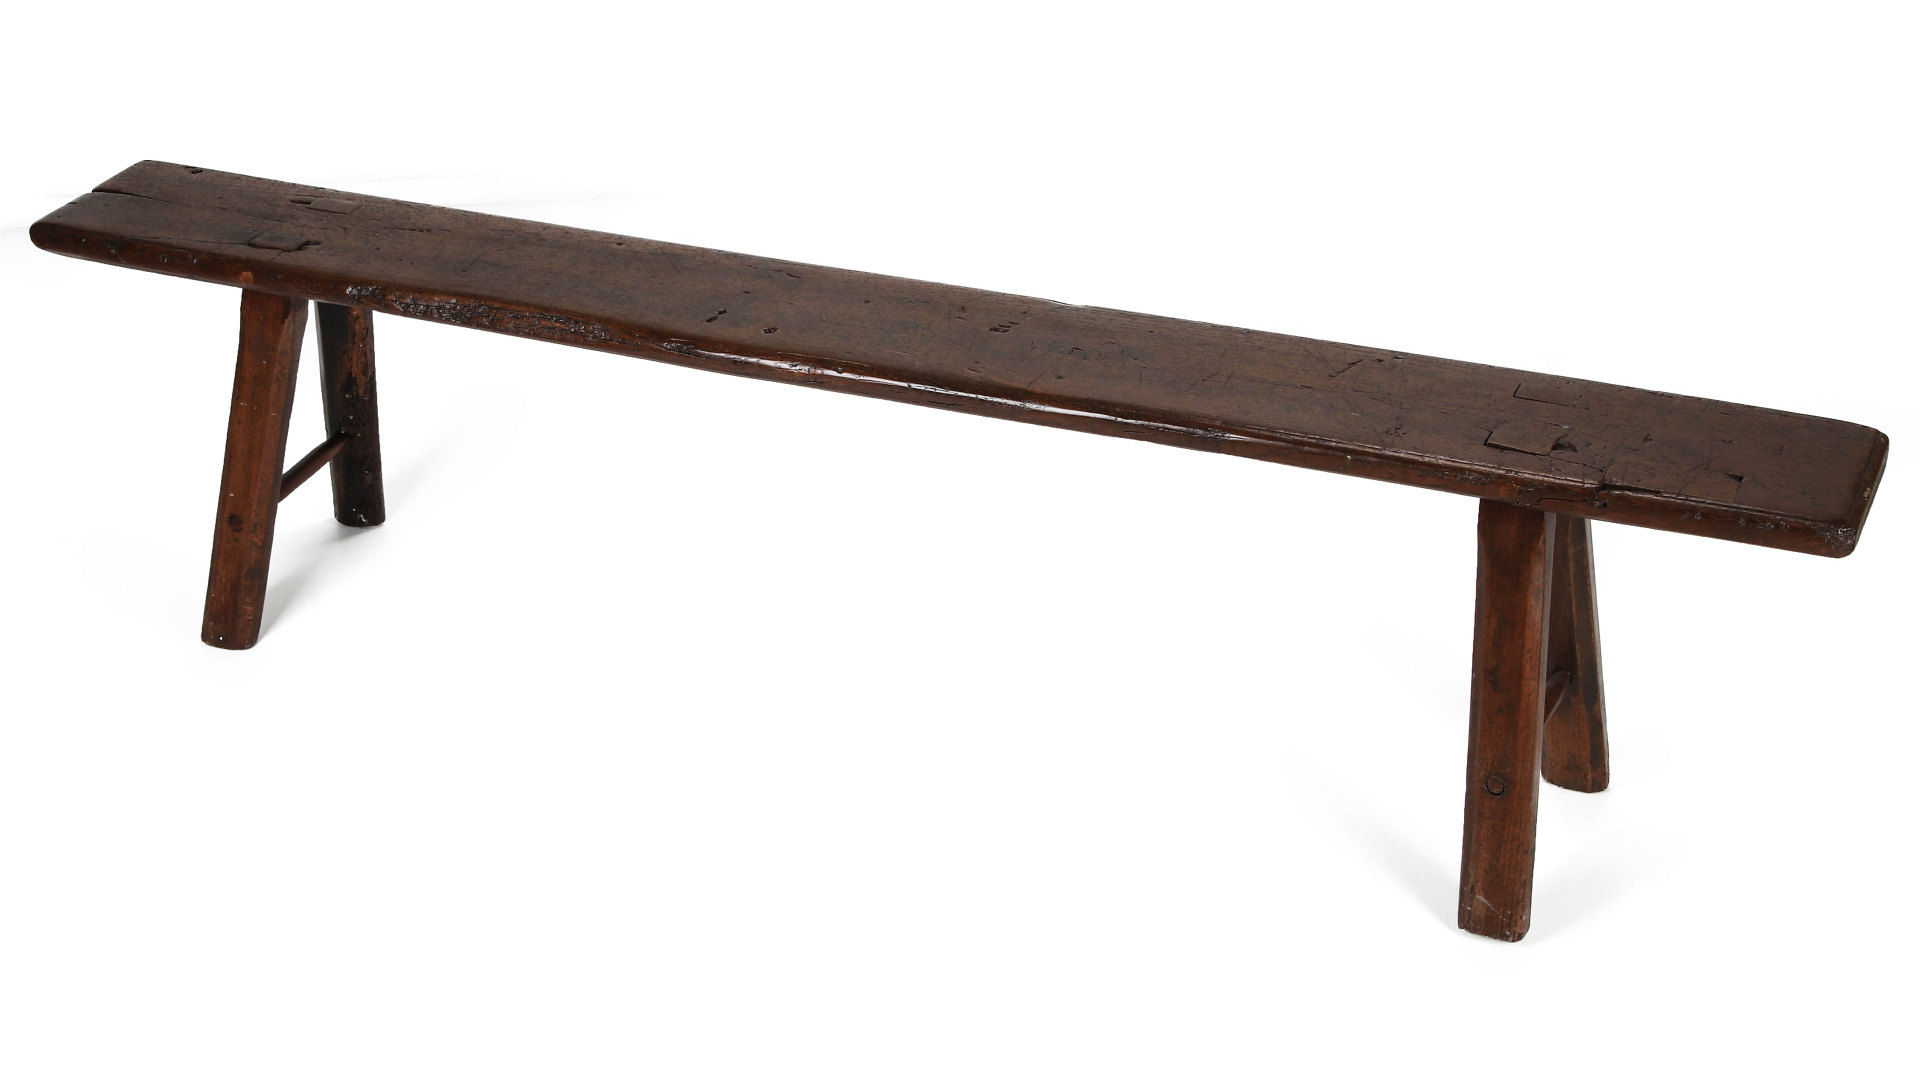 A EARLY 18TH / EARLY 19TH CENTURY PRIMITIVE BENCH